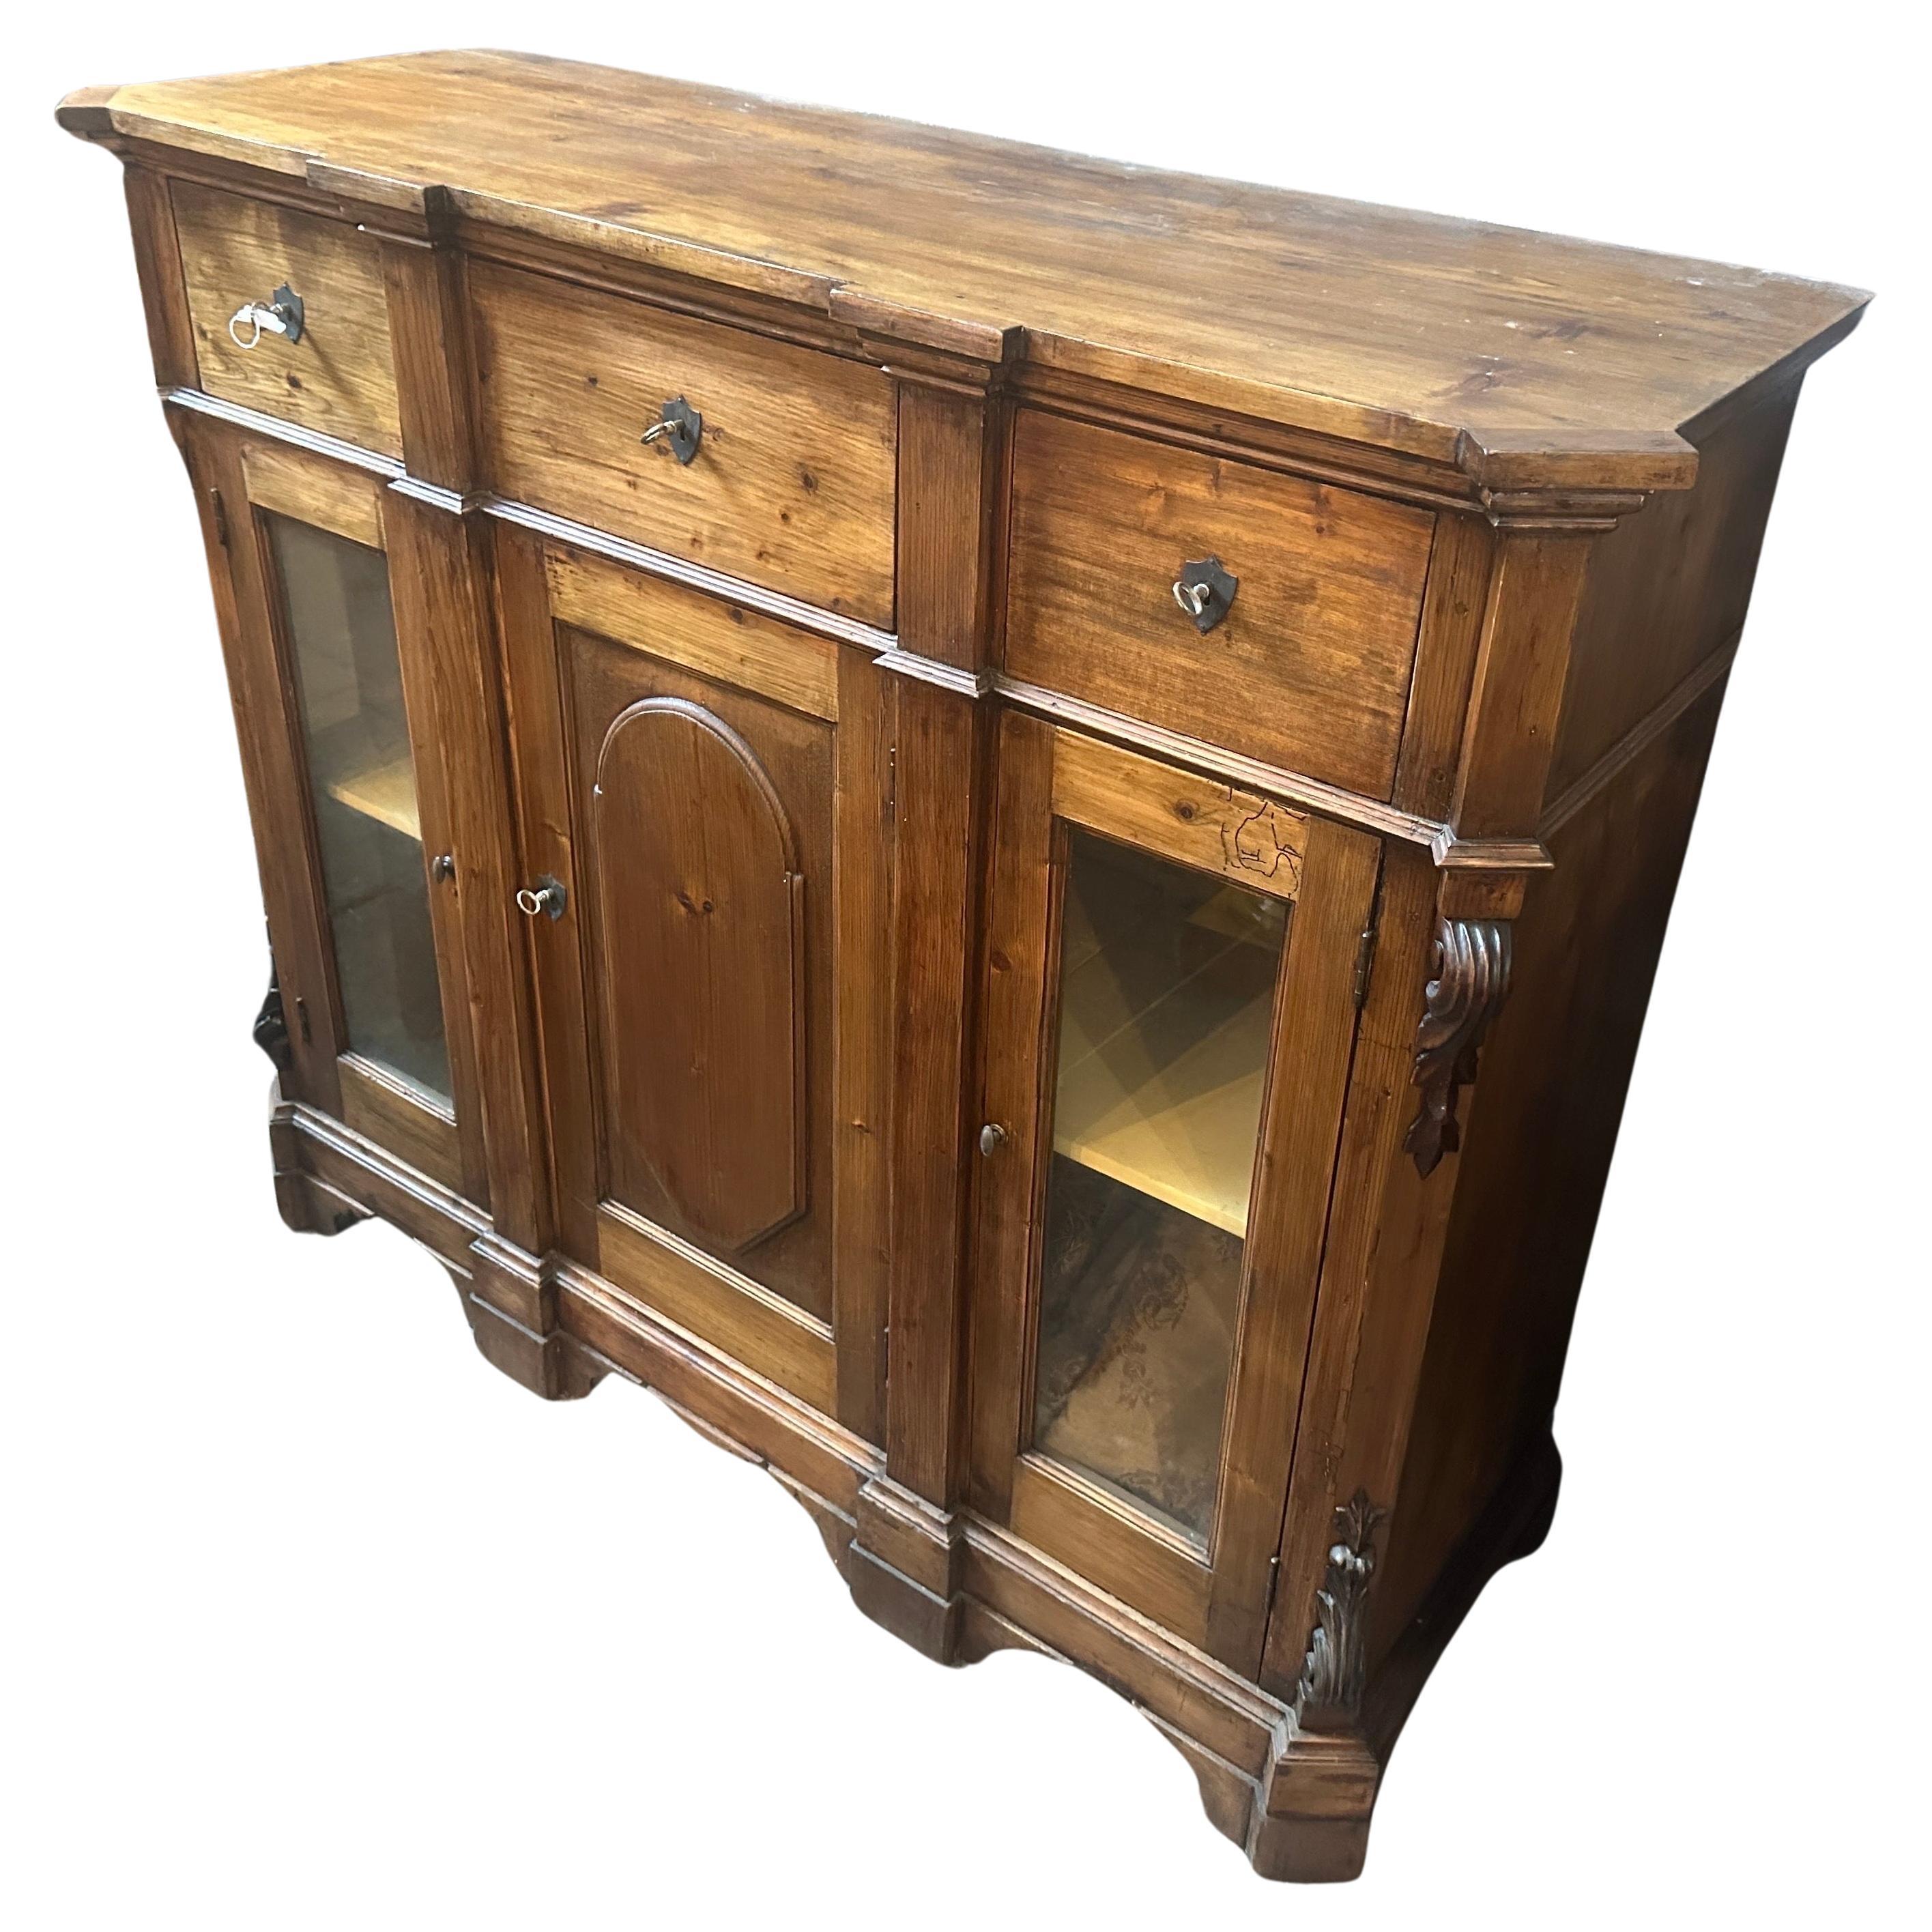 This Sicilian Credenza is a splendid piece of antique furniture that encapsulates the elegance and craftsmanship of the era. Crafted during the reign of Louis Philippe, this credenza it's in original condition, with signs of use and age visible on